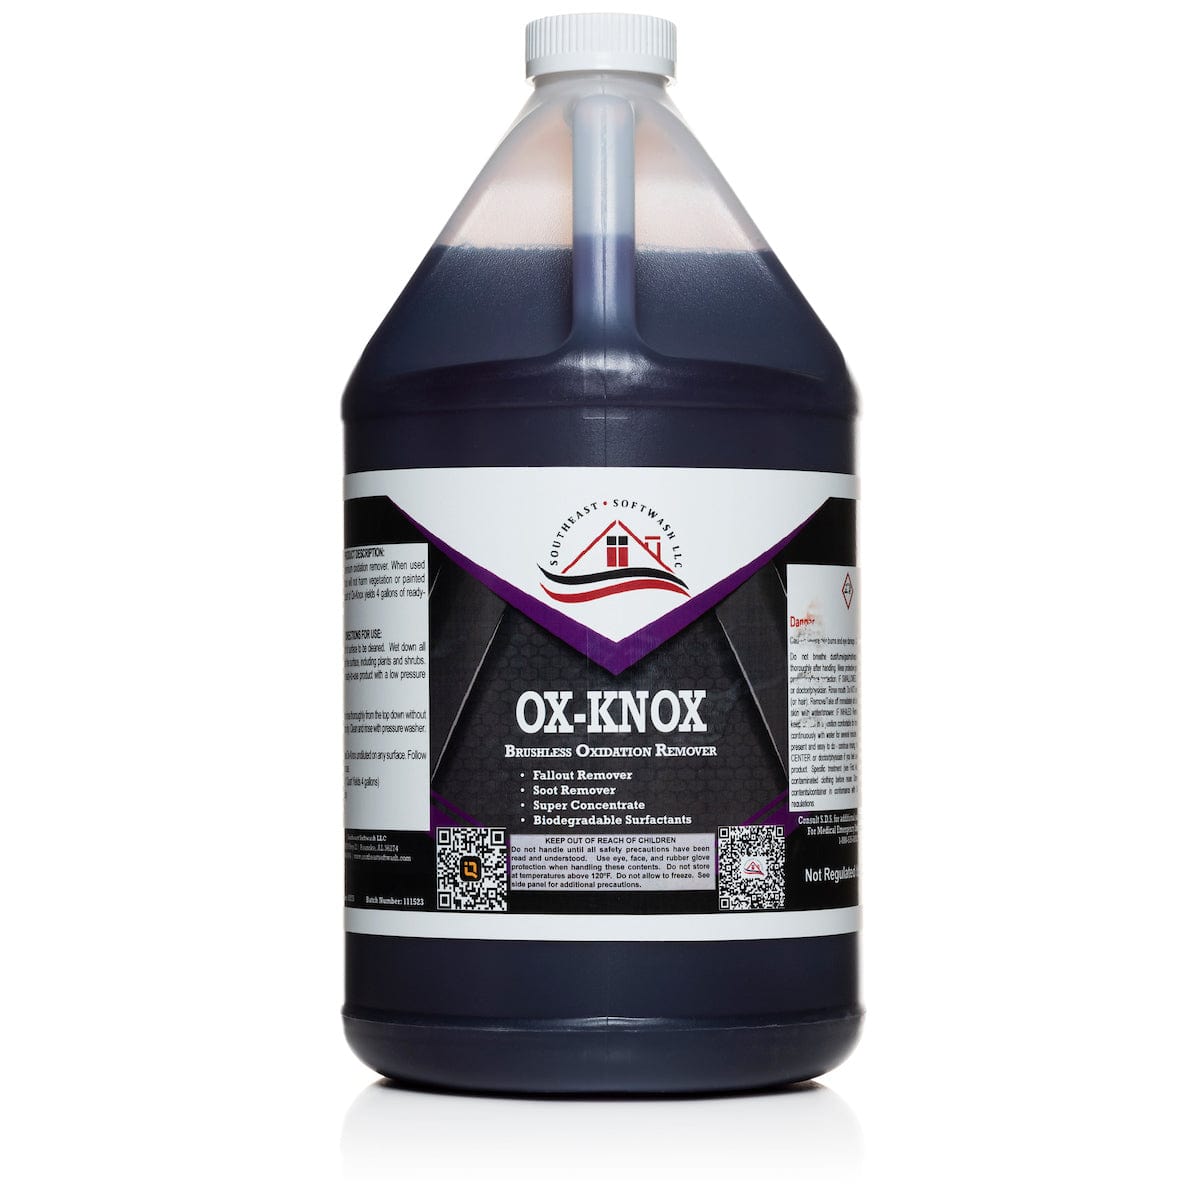 Southeast Softwash 1 gallon jug Ox-Knox Brushless Oxidation Remover